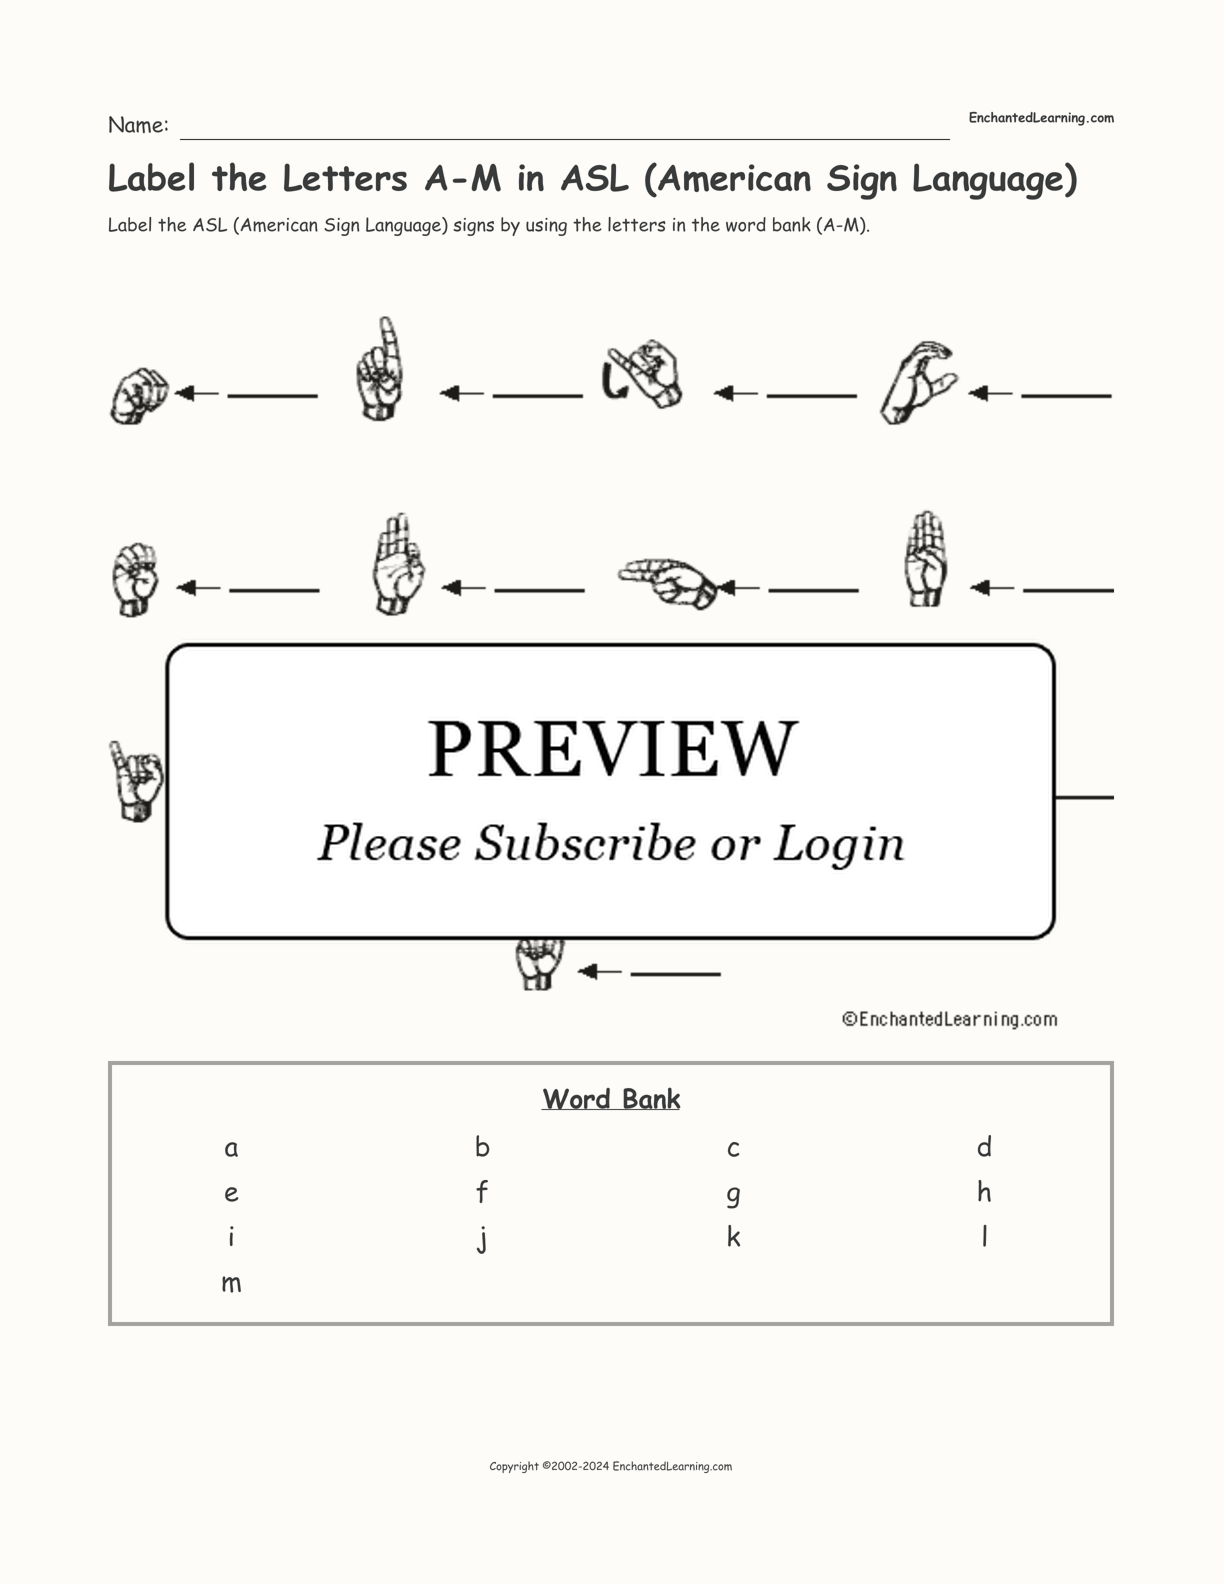 Label the Letters A-M in ASL (American Sign Language) interactive worksheet page 1